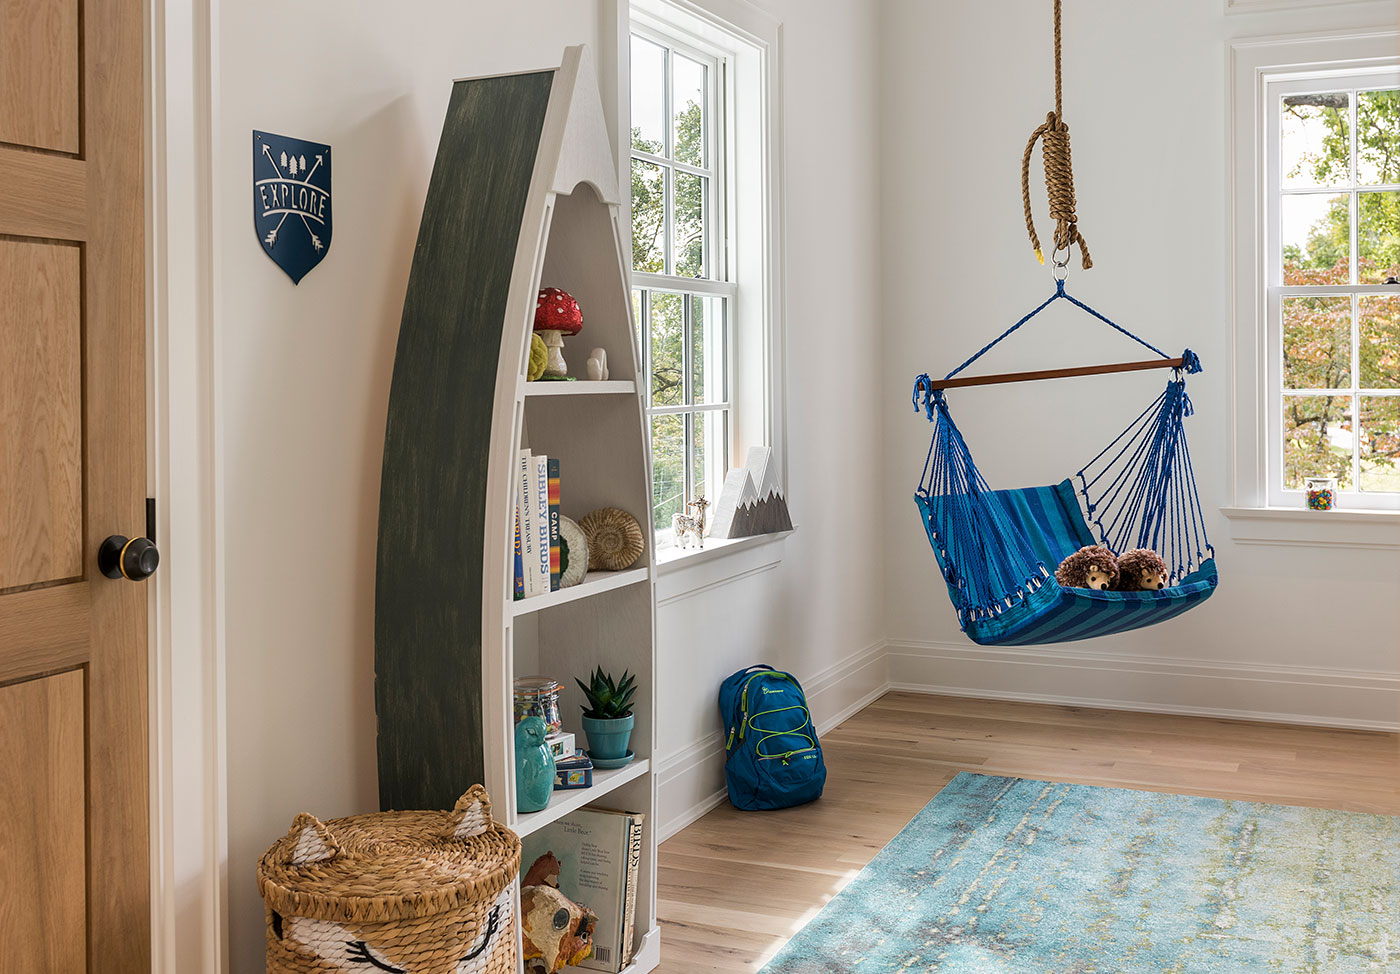 Wooden floors and interior doors in the kids’ living space.